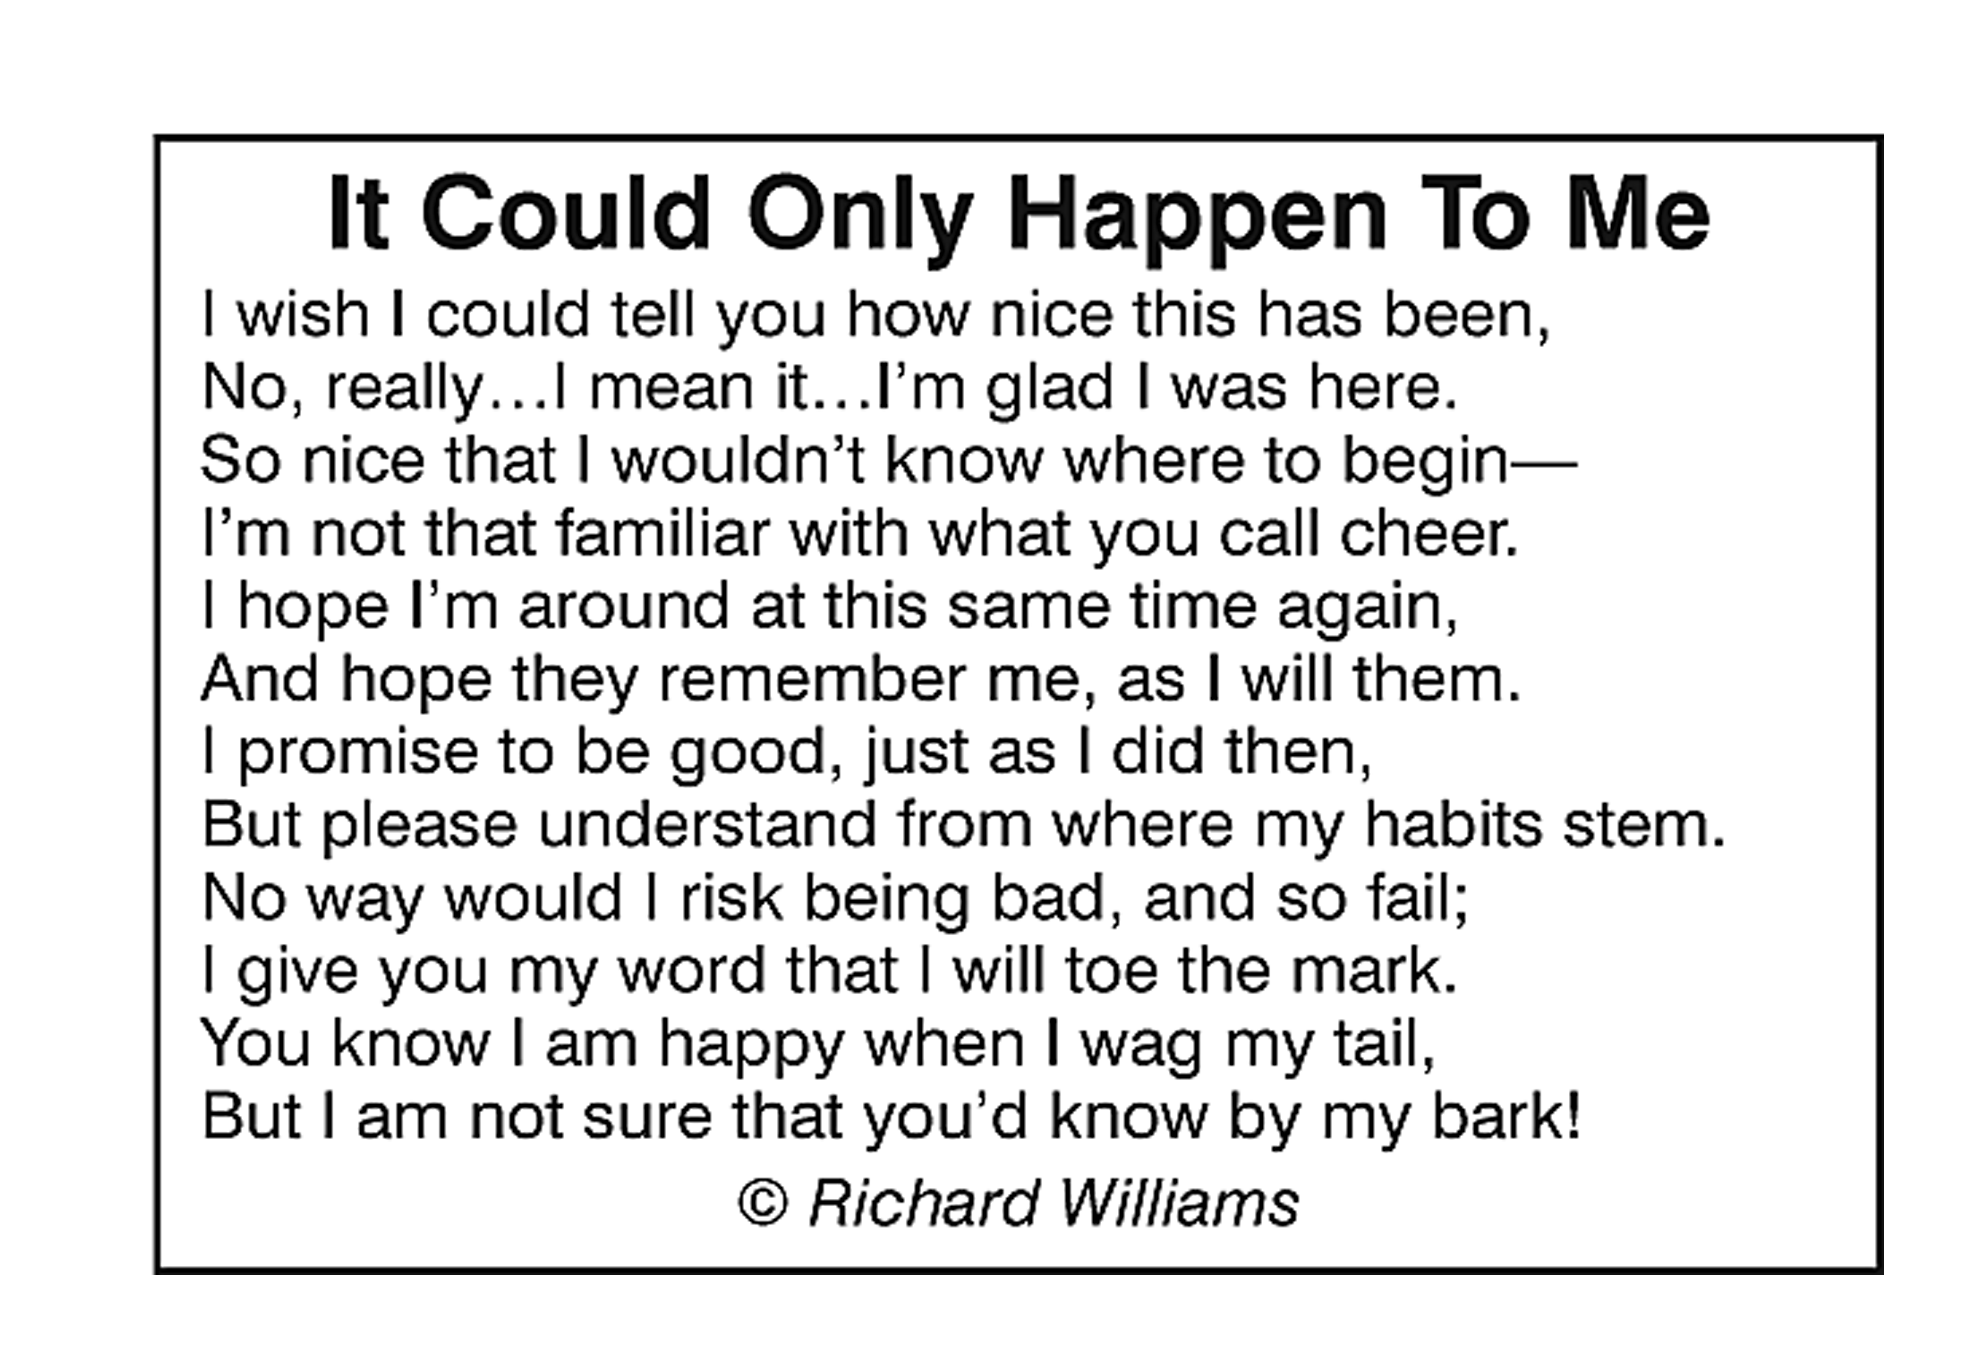 Richard Williams Poem - It Could Only Happen To Me